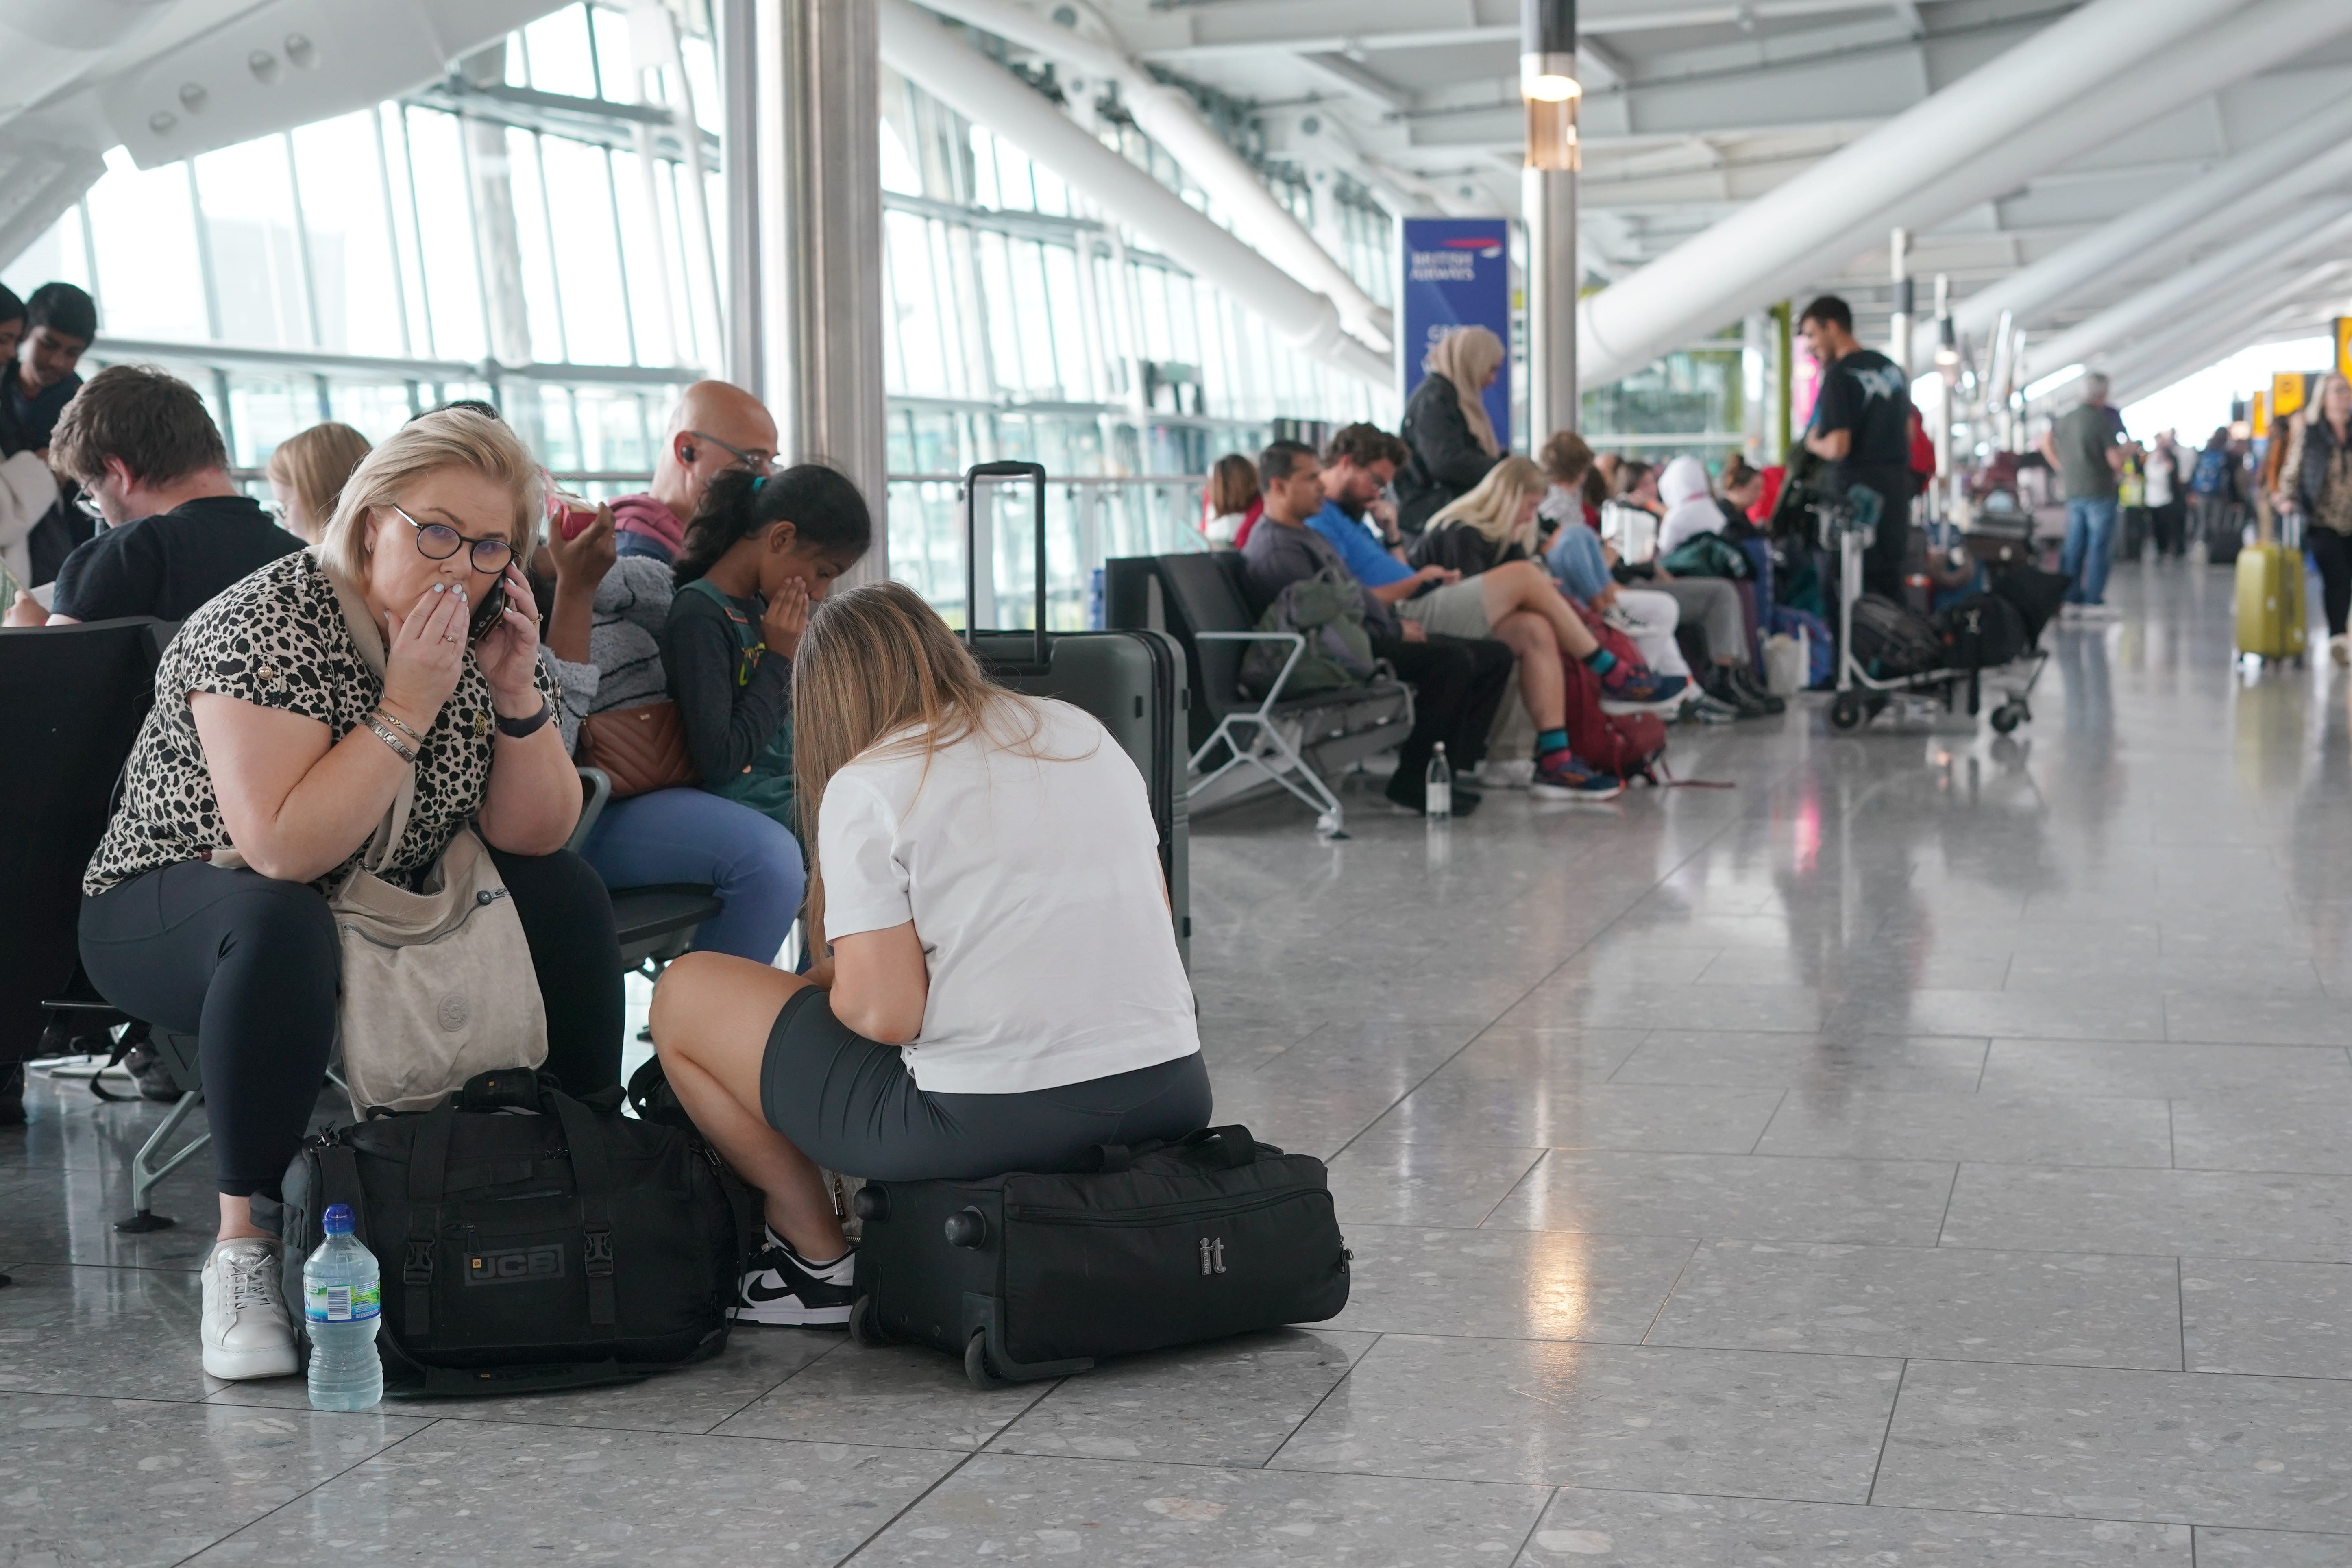 The August bank holiday meltdown hit 700,000 passengers